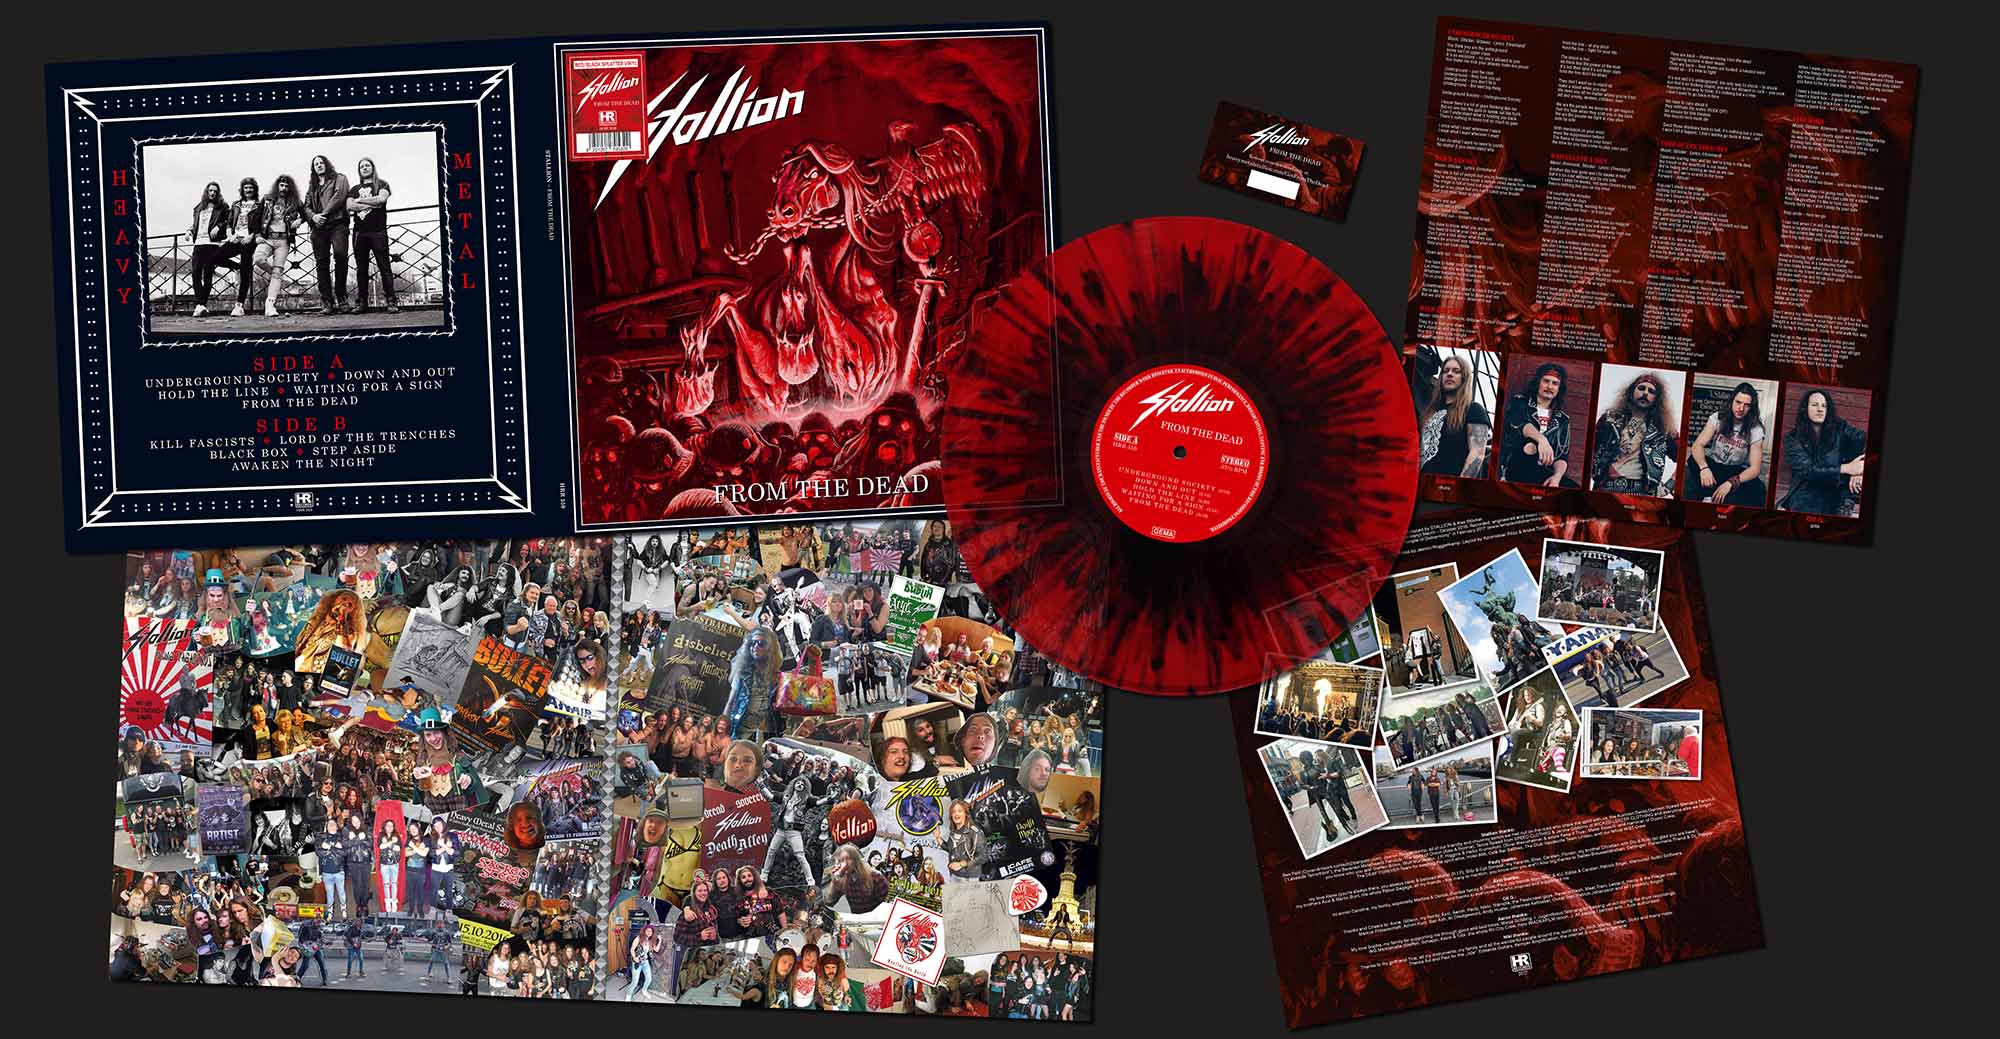 STALLION - From the Dead  LP